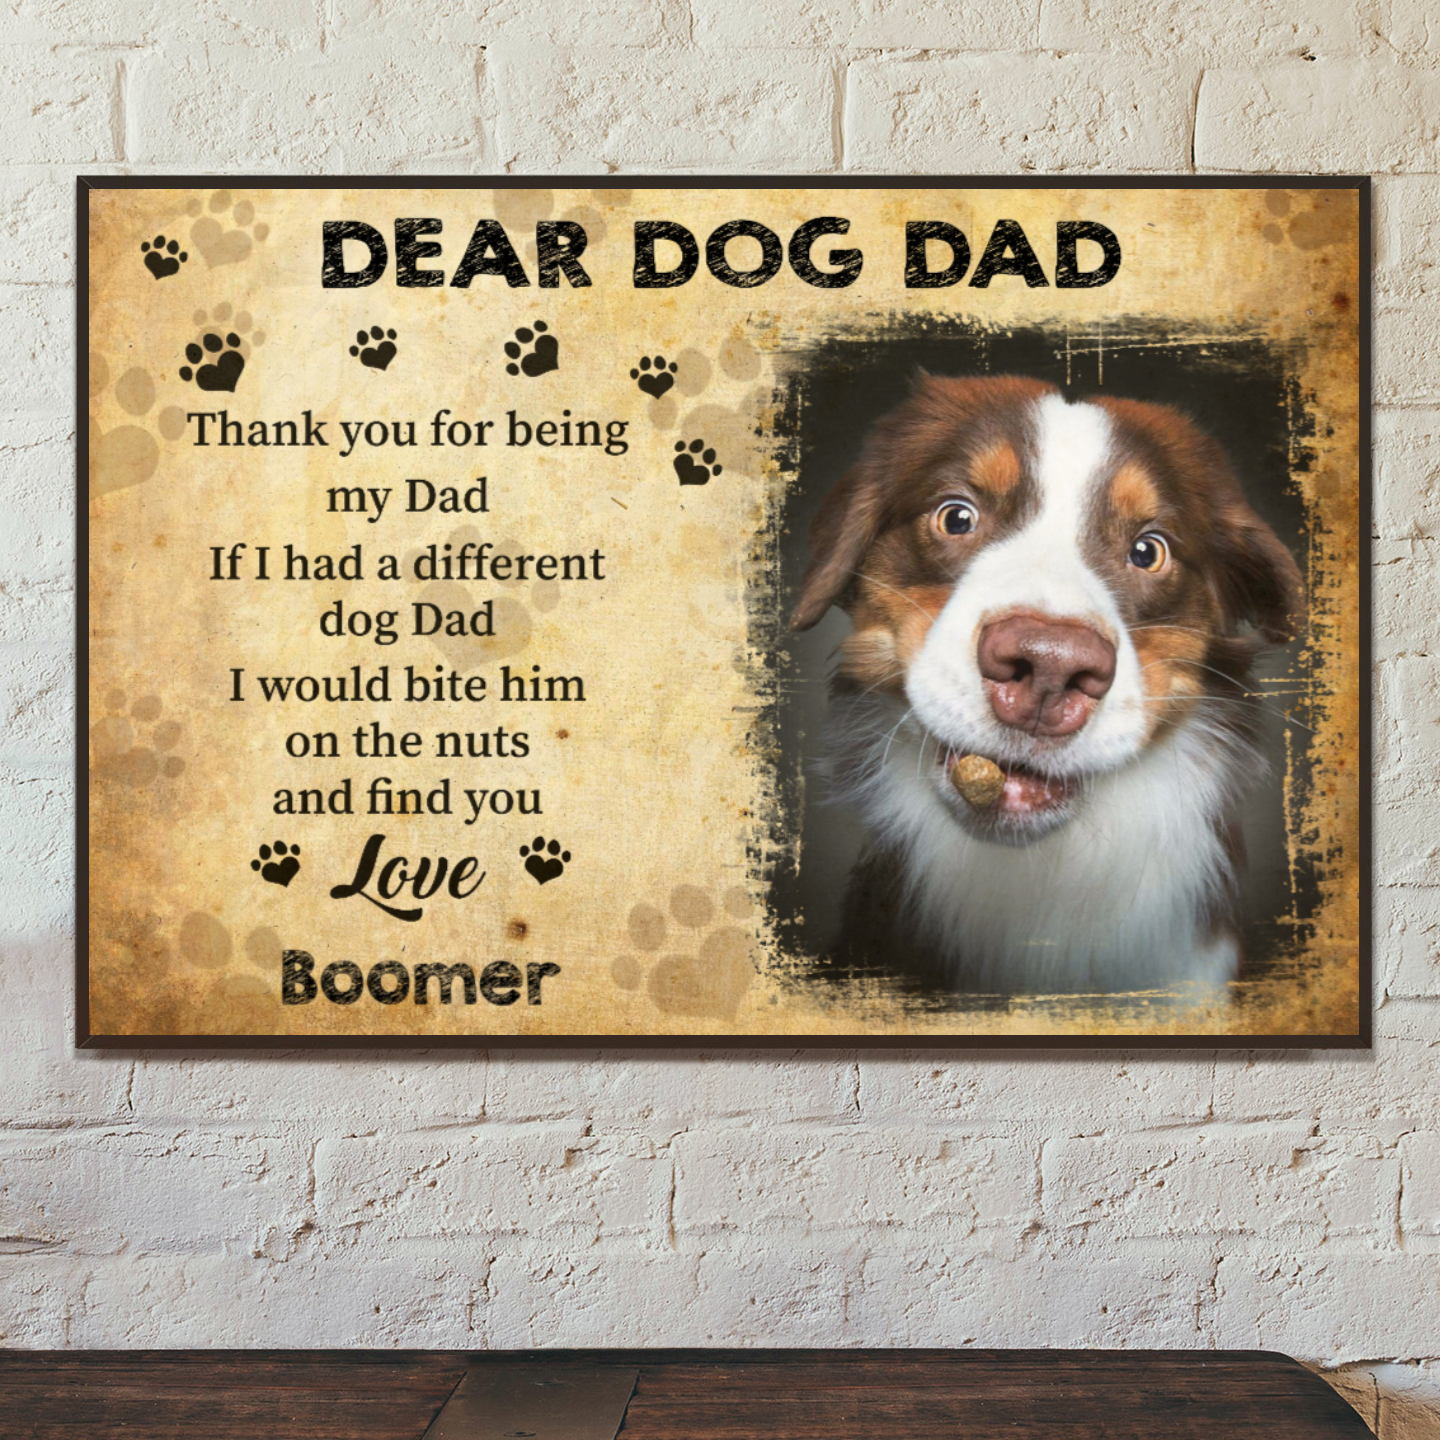 Ciaocustom Poster/Framed Canvas/Unframed Canvas, Custom Dog Image/Name/Background/Text, Gifts For Dog Lovers, Dear Dog Dad